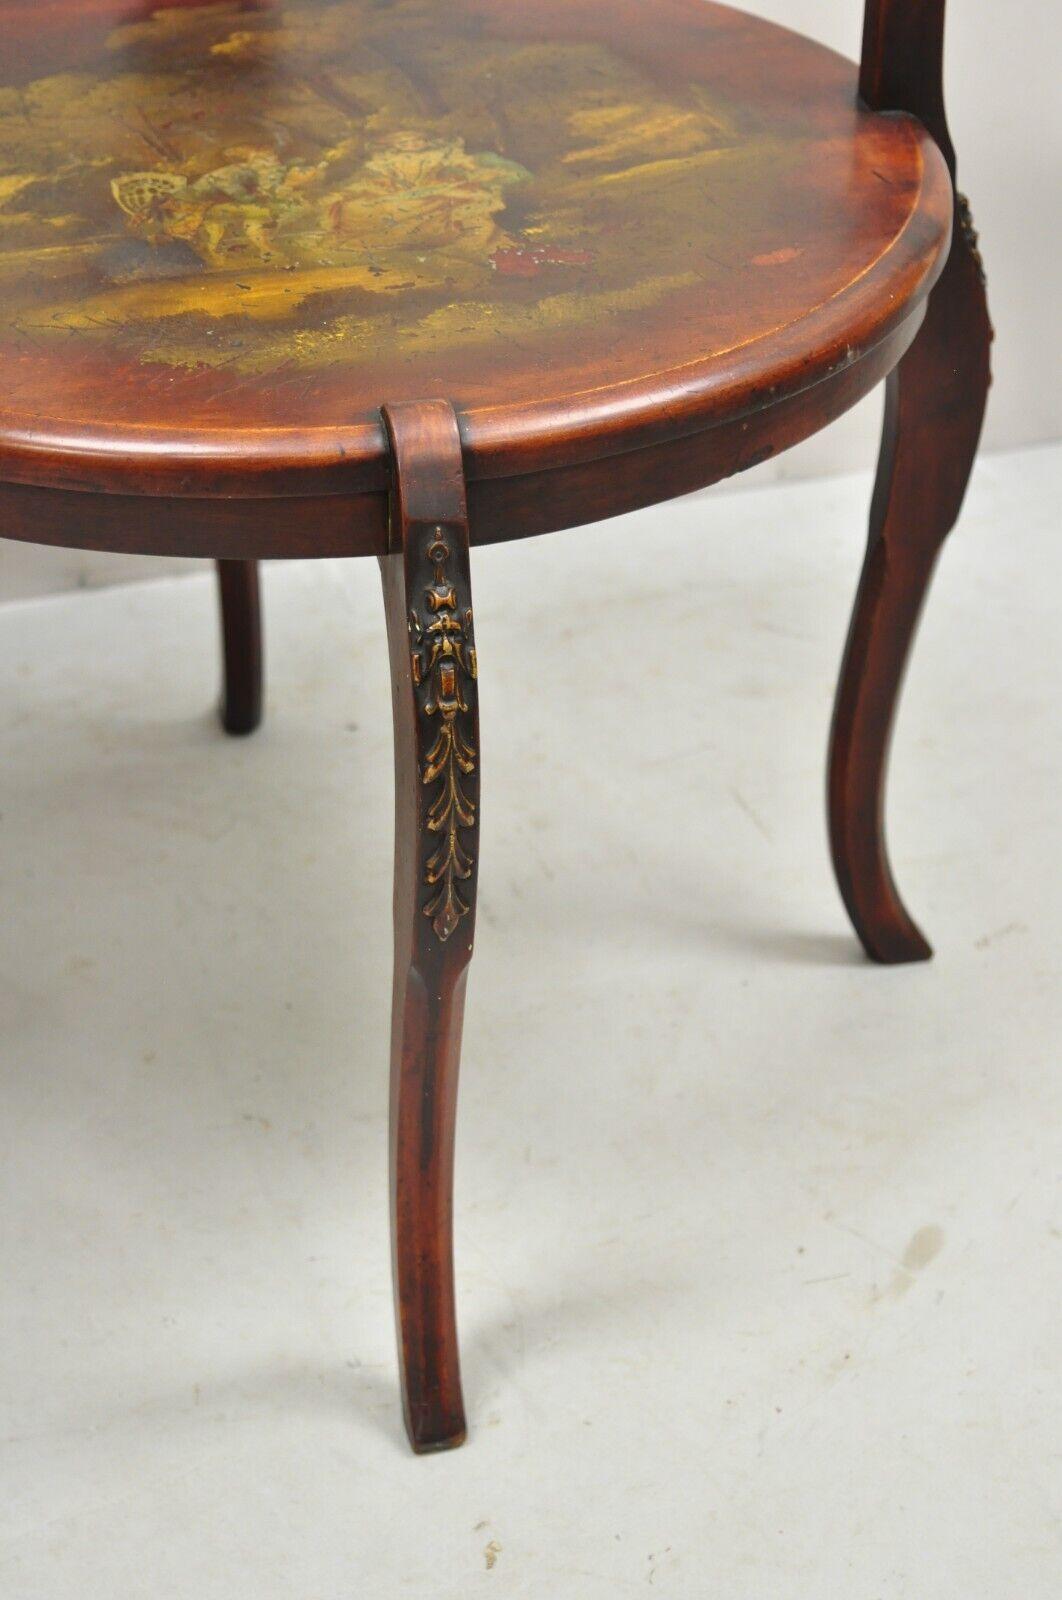 Antique Victorian Mahogany Hand Painted Tete a Tete 2 Seat Bench 1